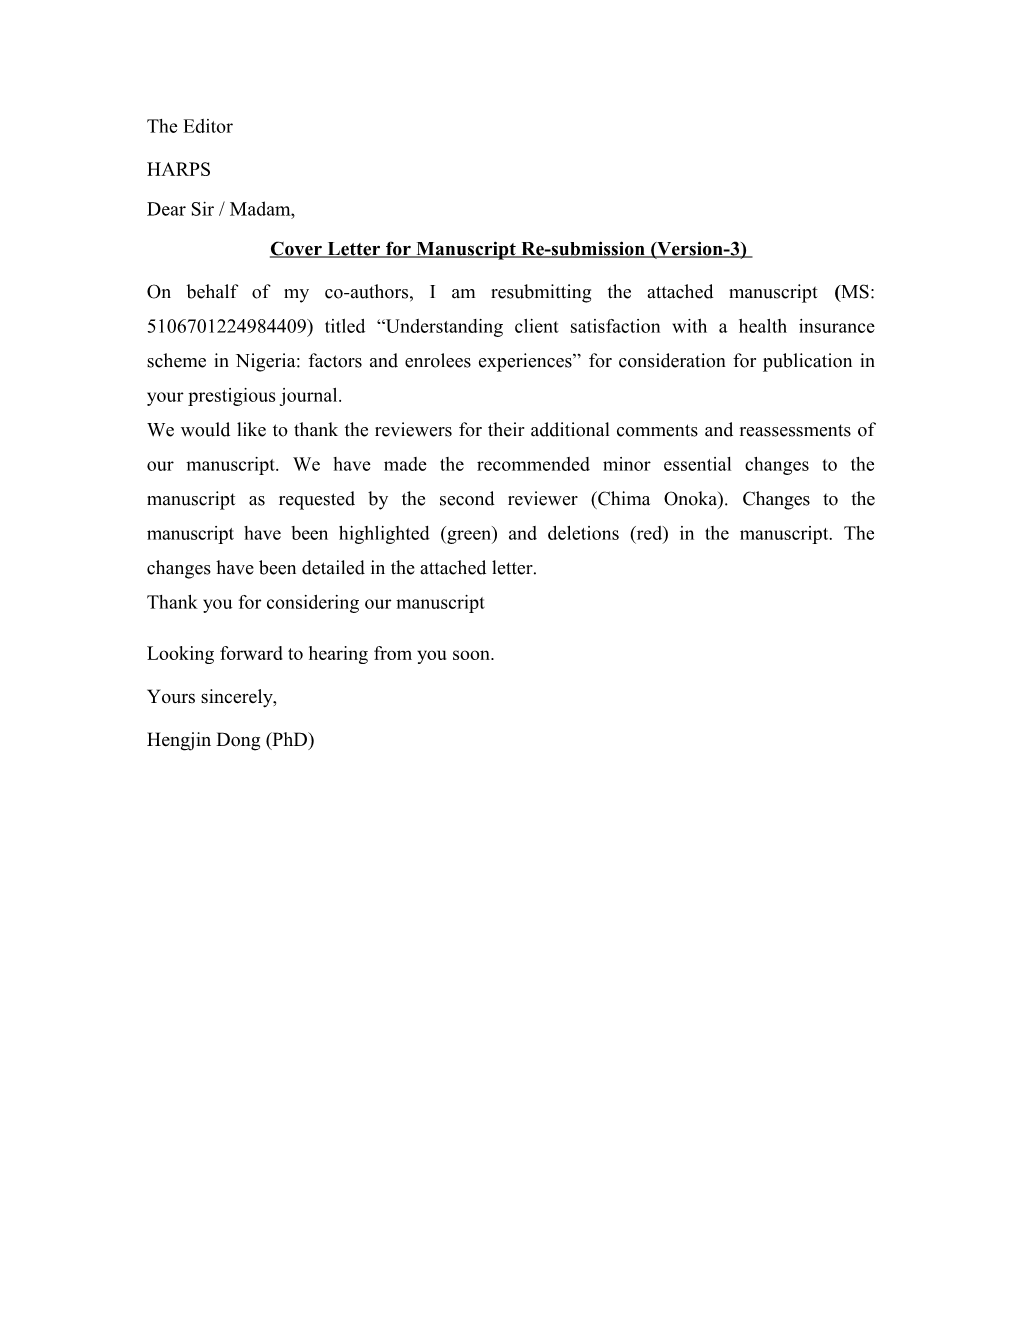 Cover Letter for Manuscript Re-Submission (Version-3)